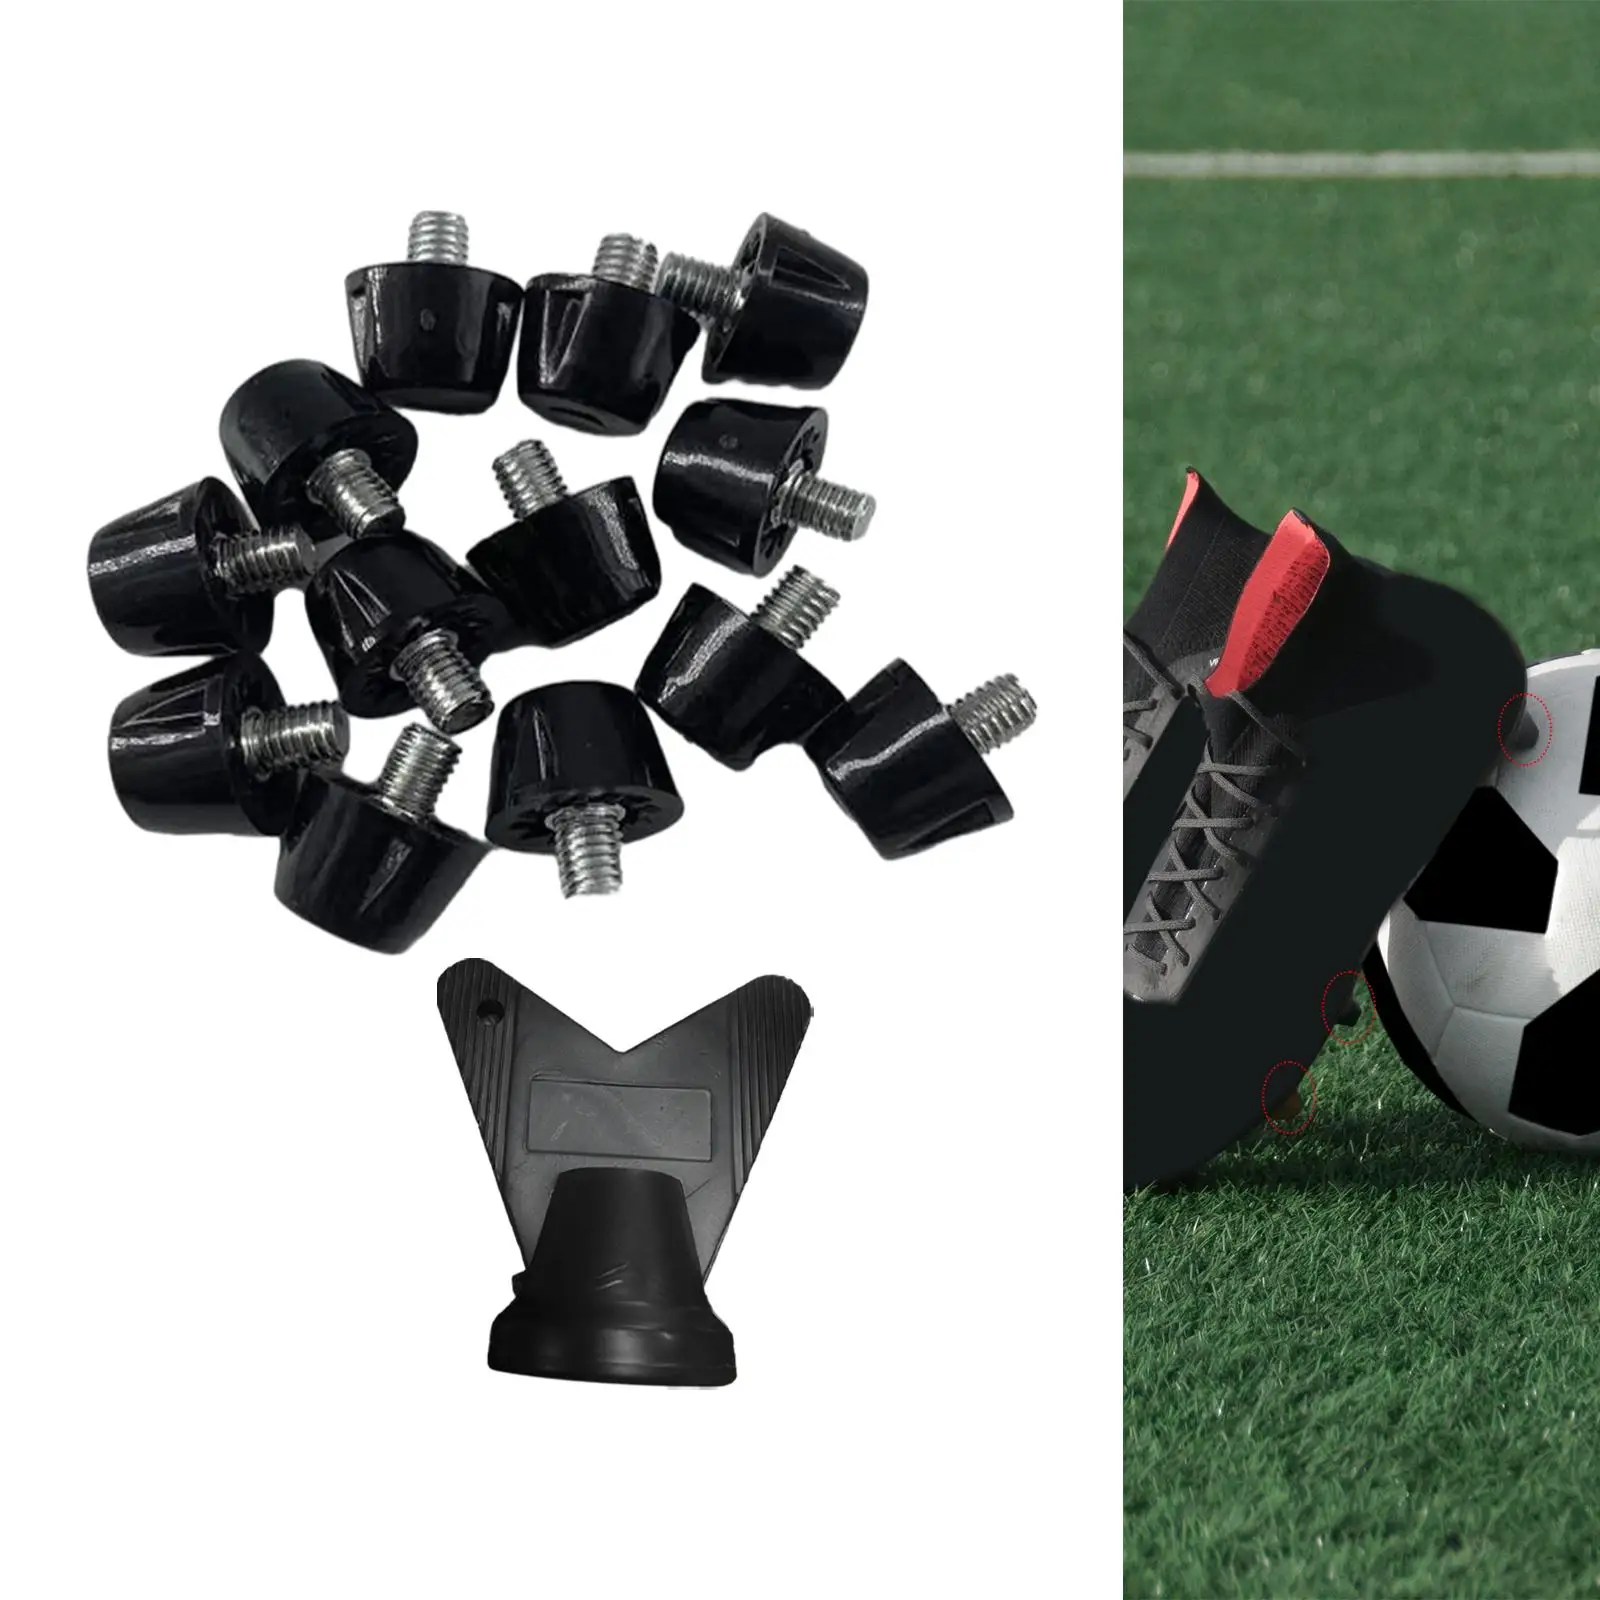 12x Football Boot Spikes Professional Soccer Boot Cleats Thread Screw 5mm Dia Replacement Studs with Wrench Track Shoes Spikes